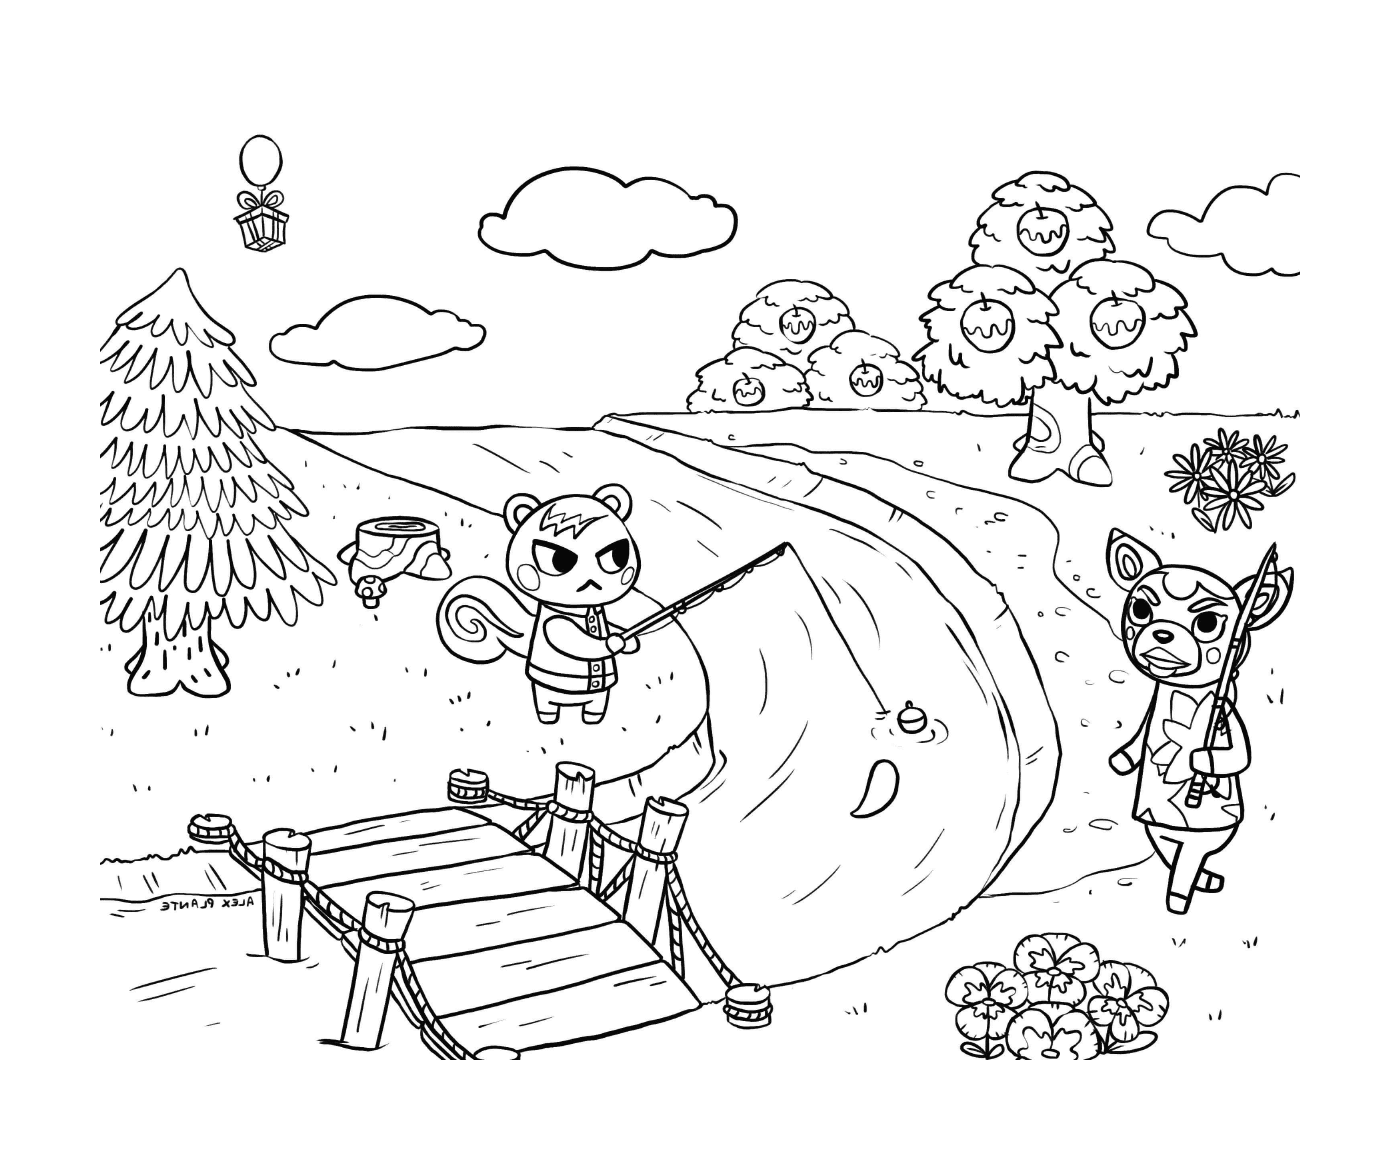  Villagers of Animal Crossing fishing a bear 